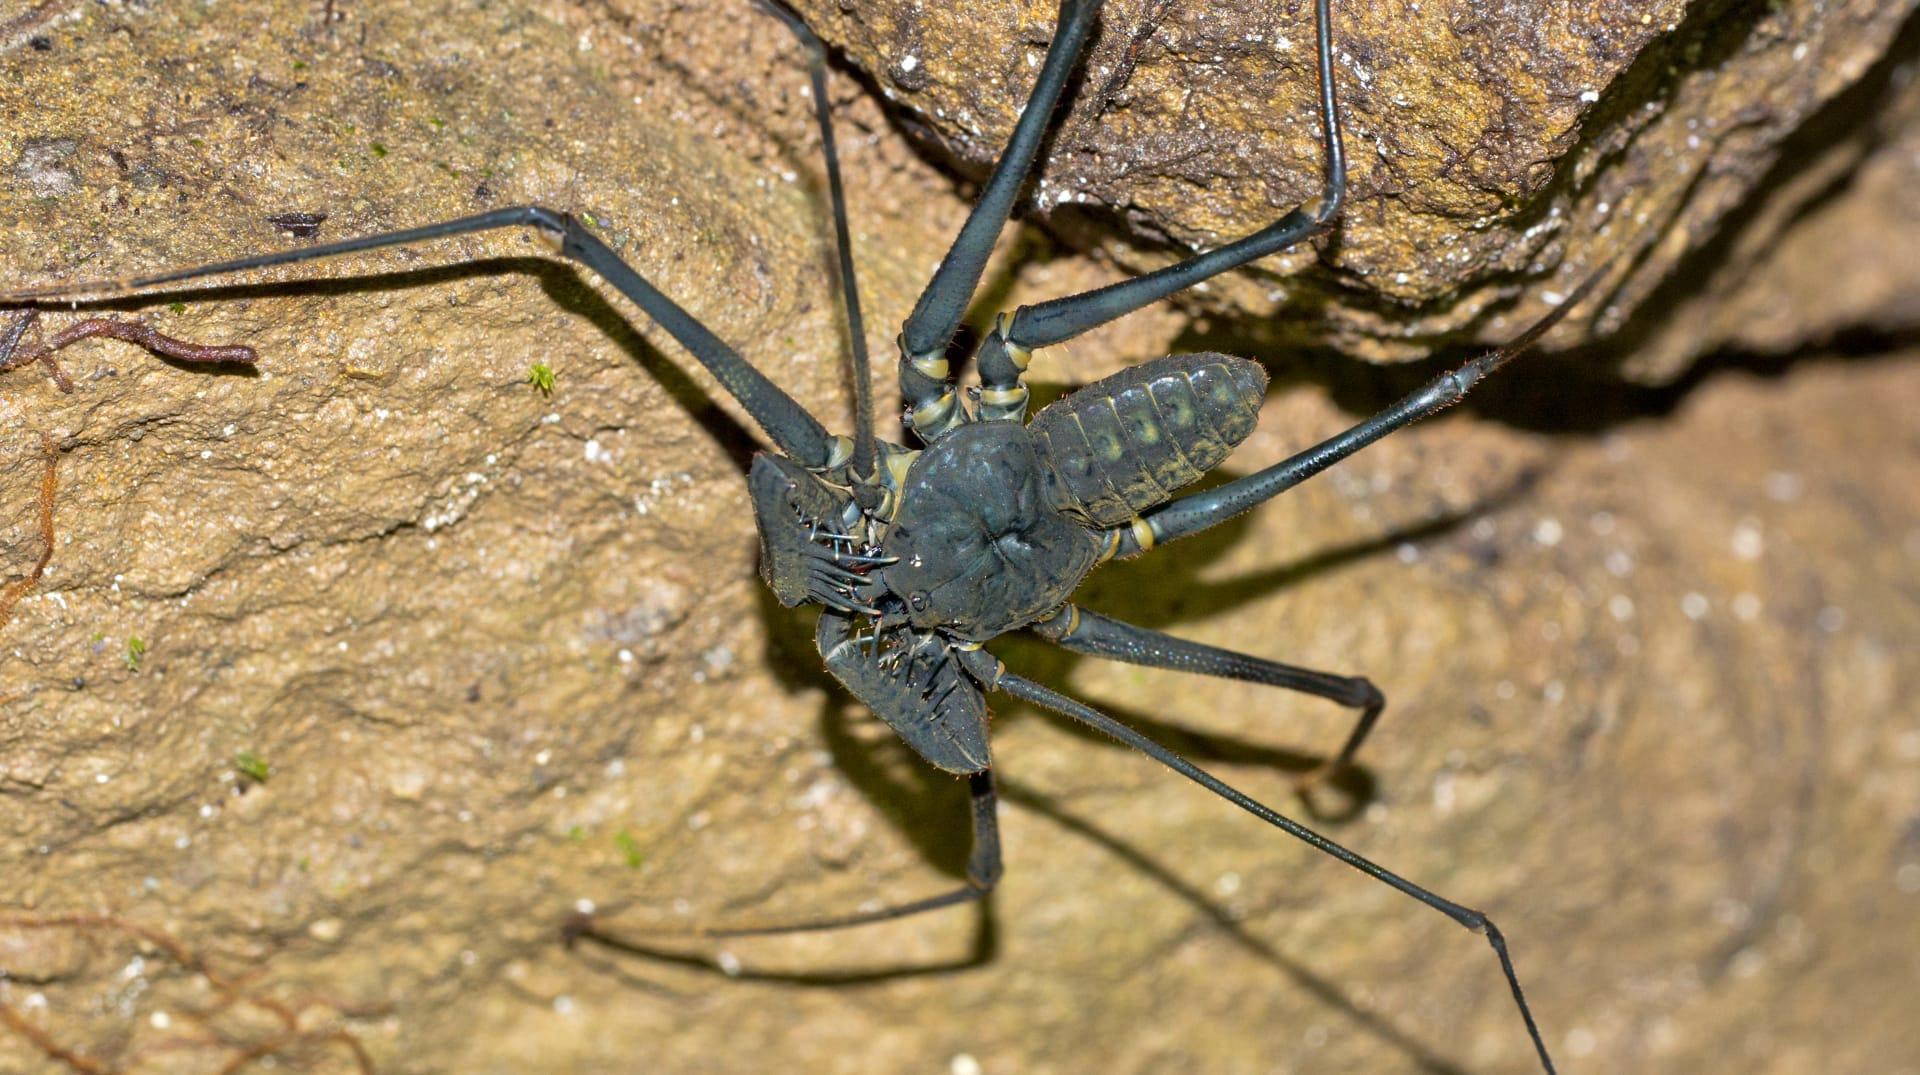 Whip scorpion pictures